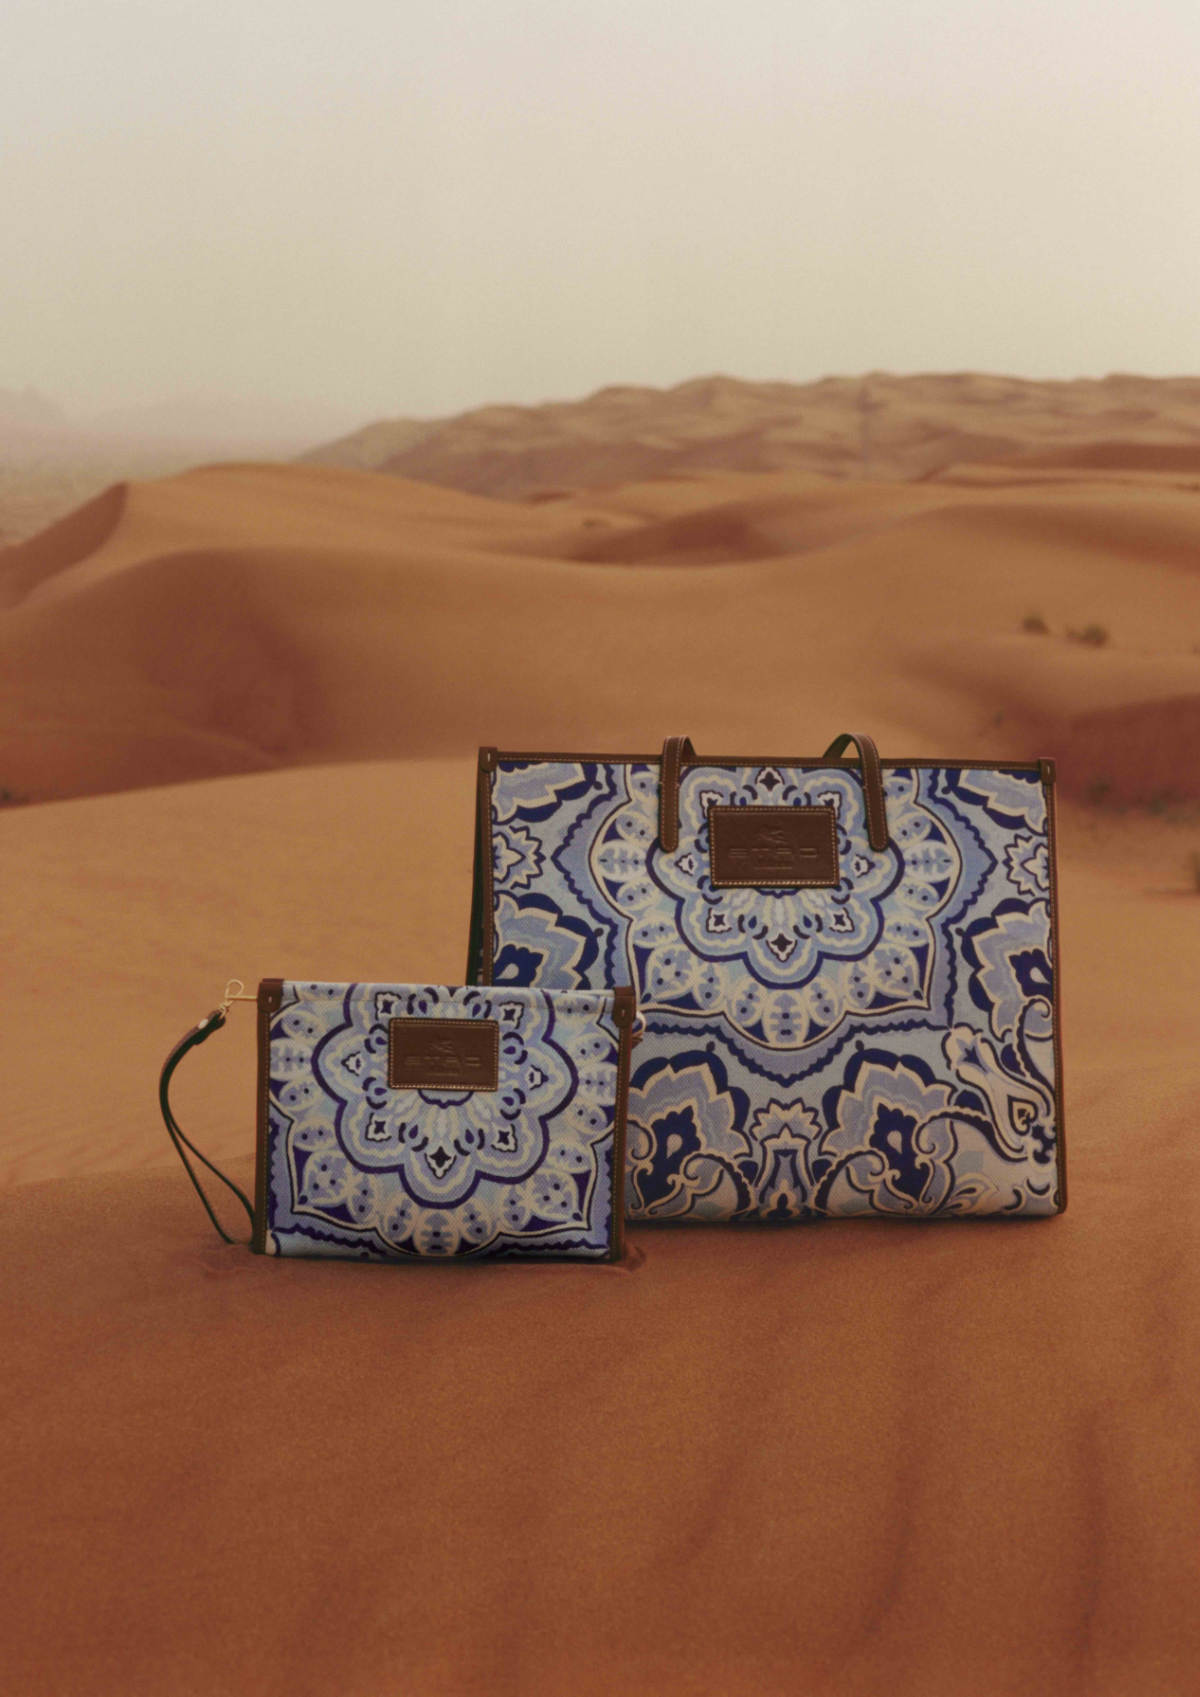 Etro Releases The New “Magic Mandala” Bags For Mother’s Day